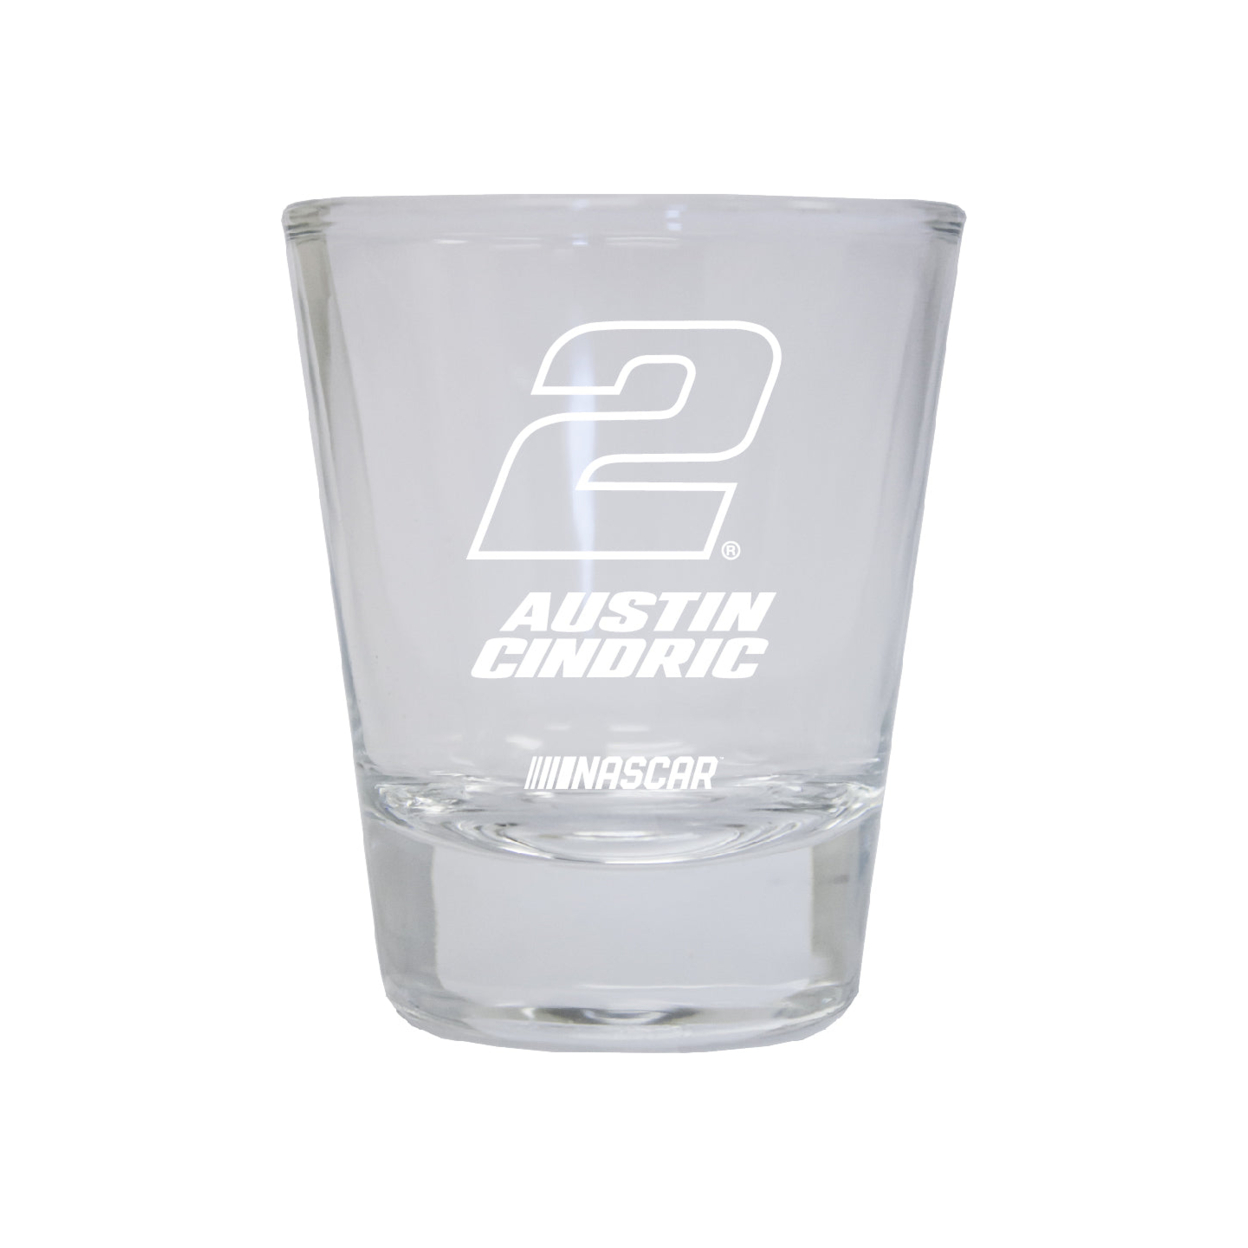 Austin Cindric #2 Nascar Etched Round Shot Glass New For 2022